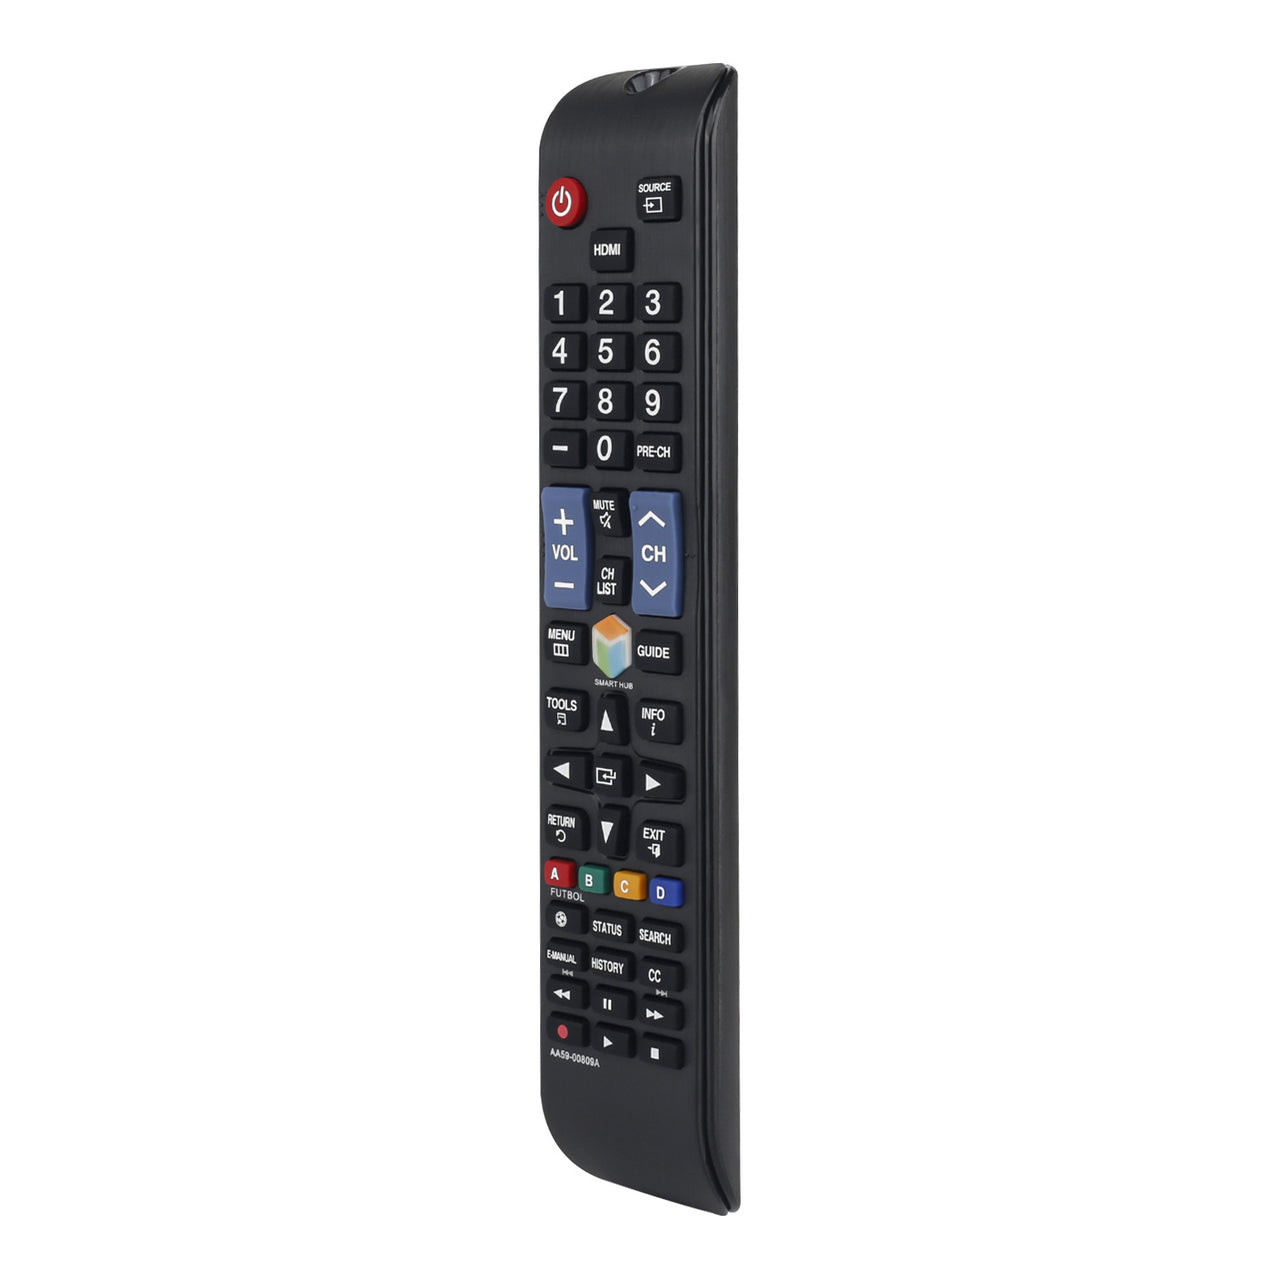 AA59-00809A Replacement Remote for Samsung Televisions